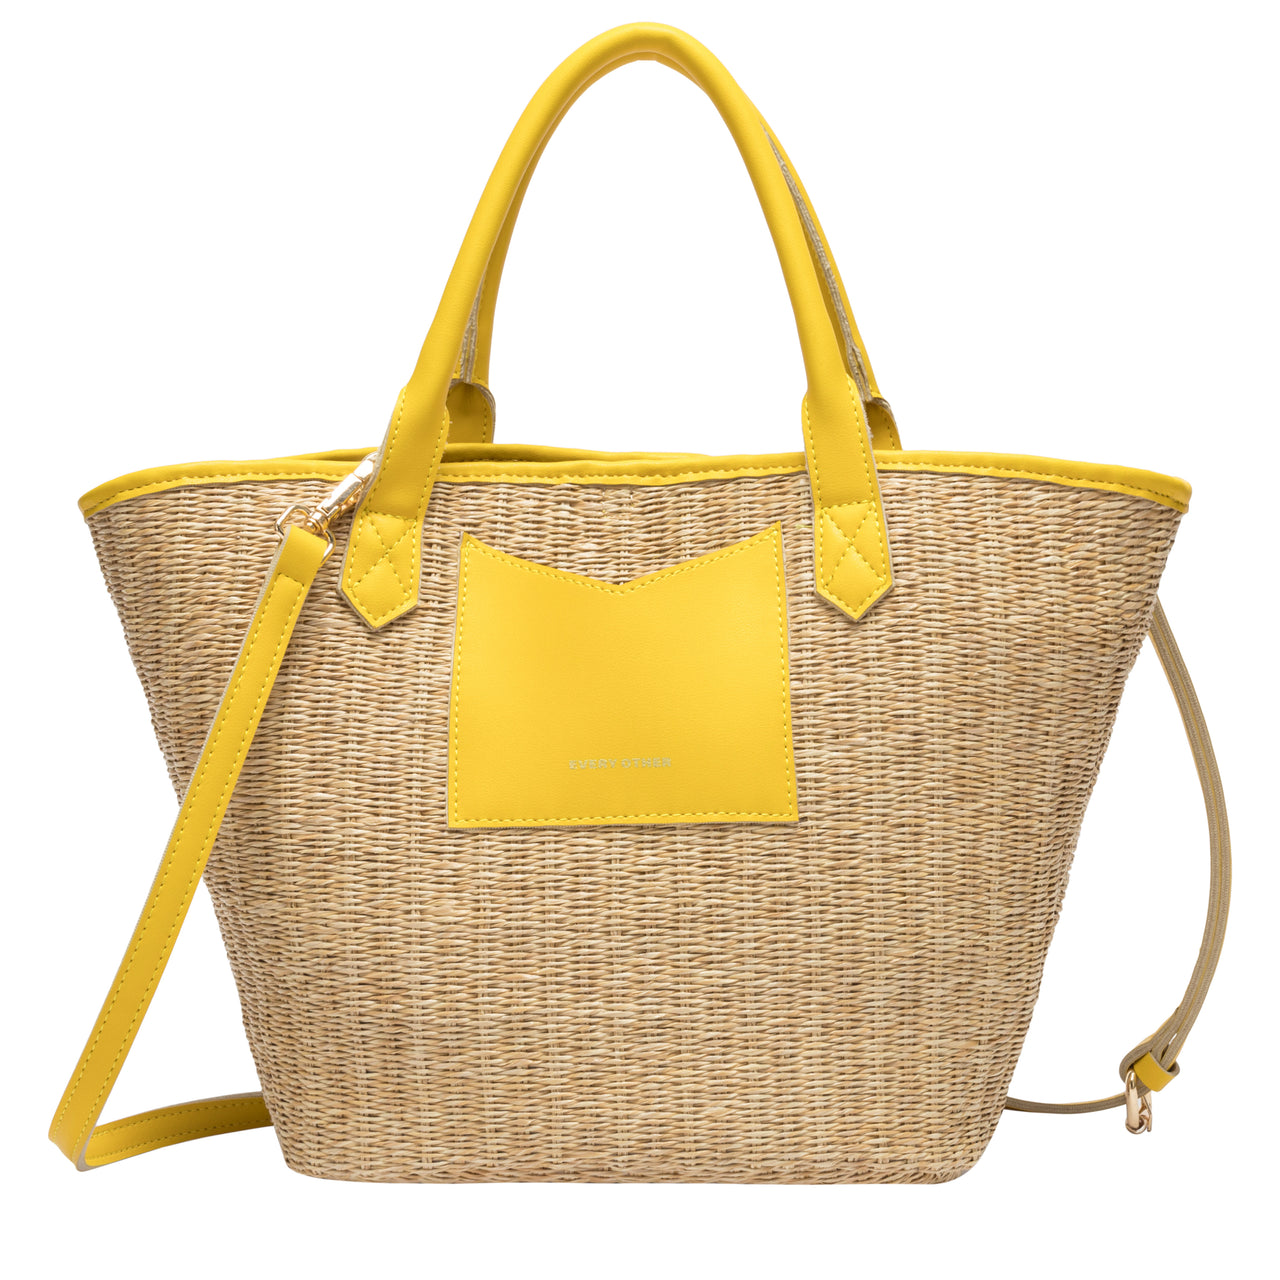 Every Other Large Twin Tote Bag - Yellow